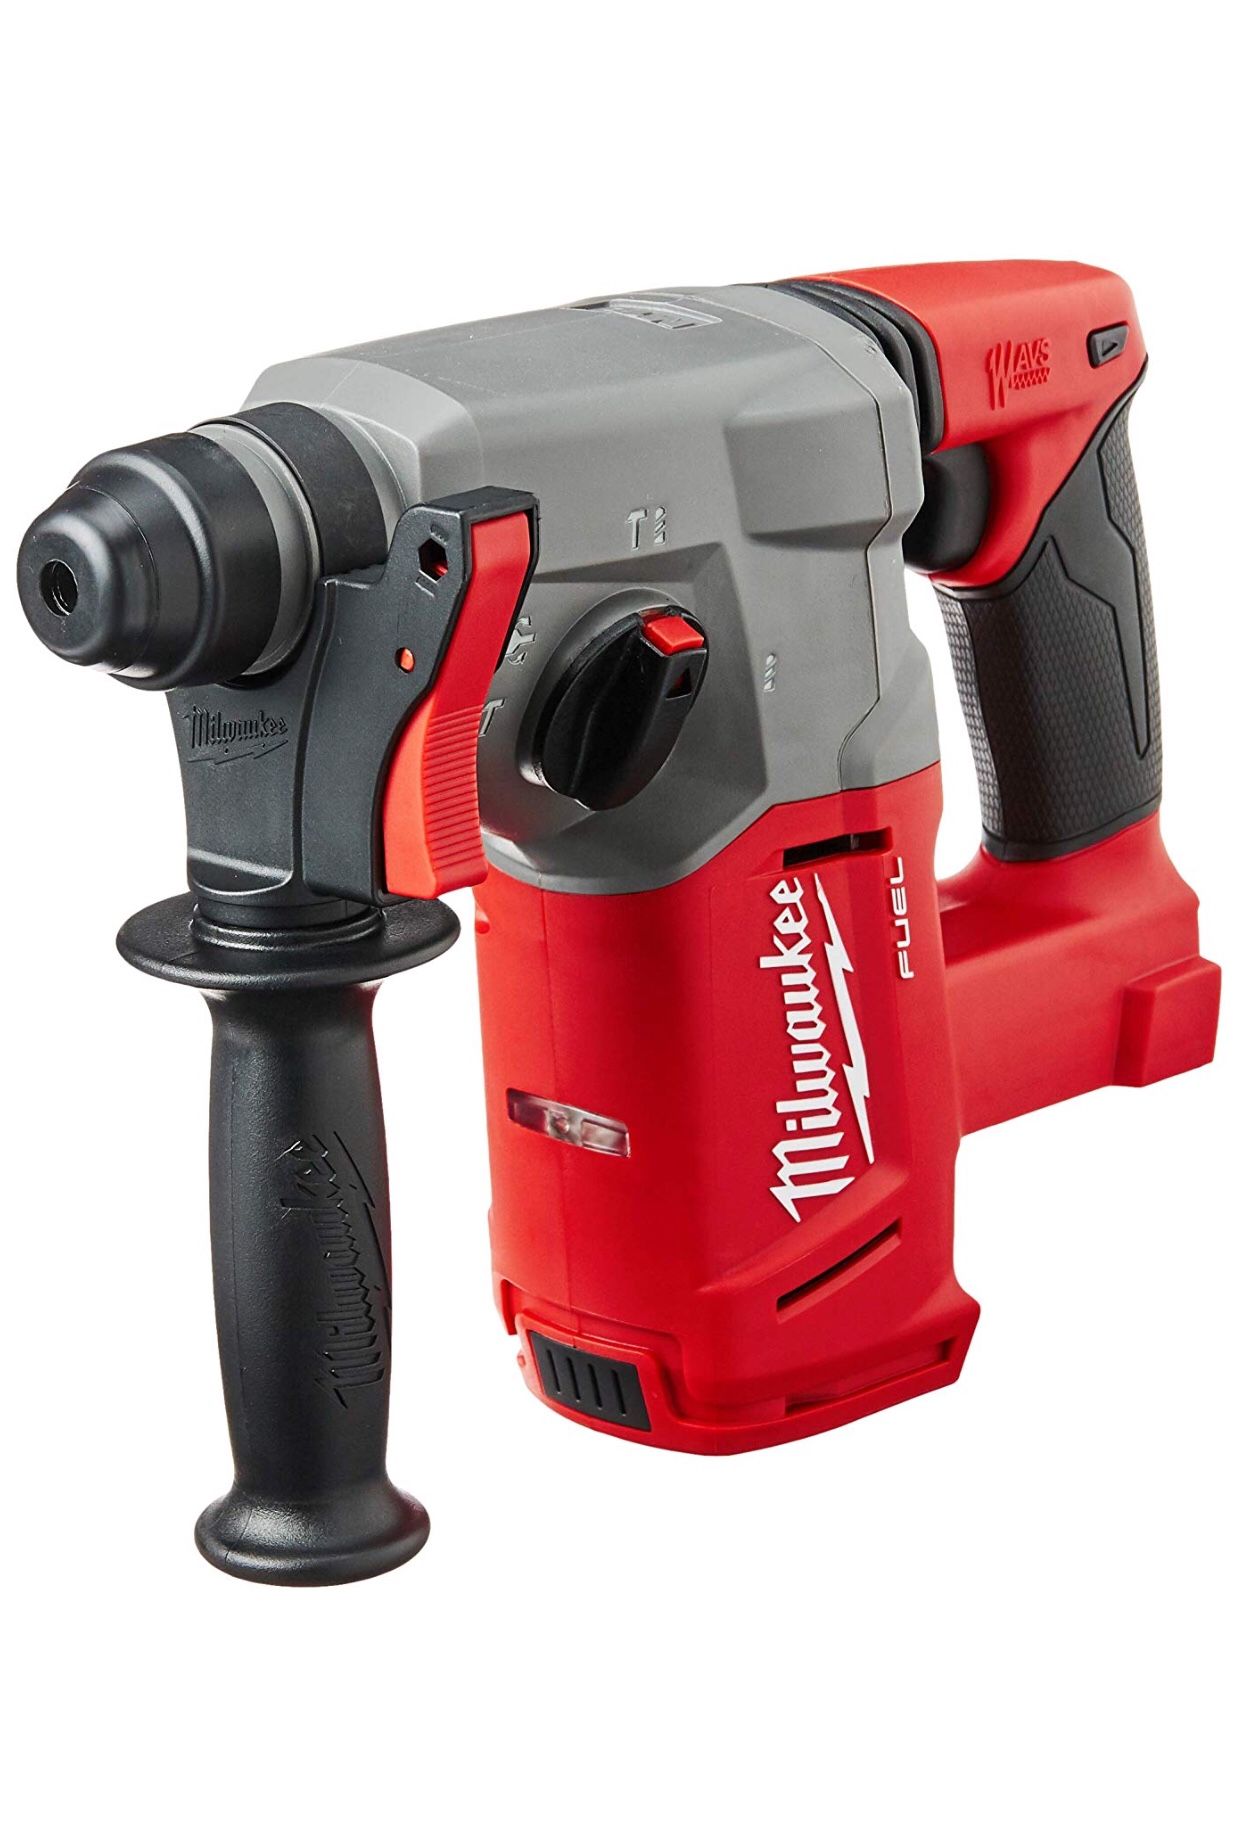 1” Rotary hammer and 8.0 battery